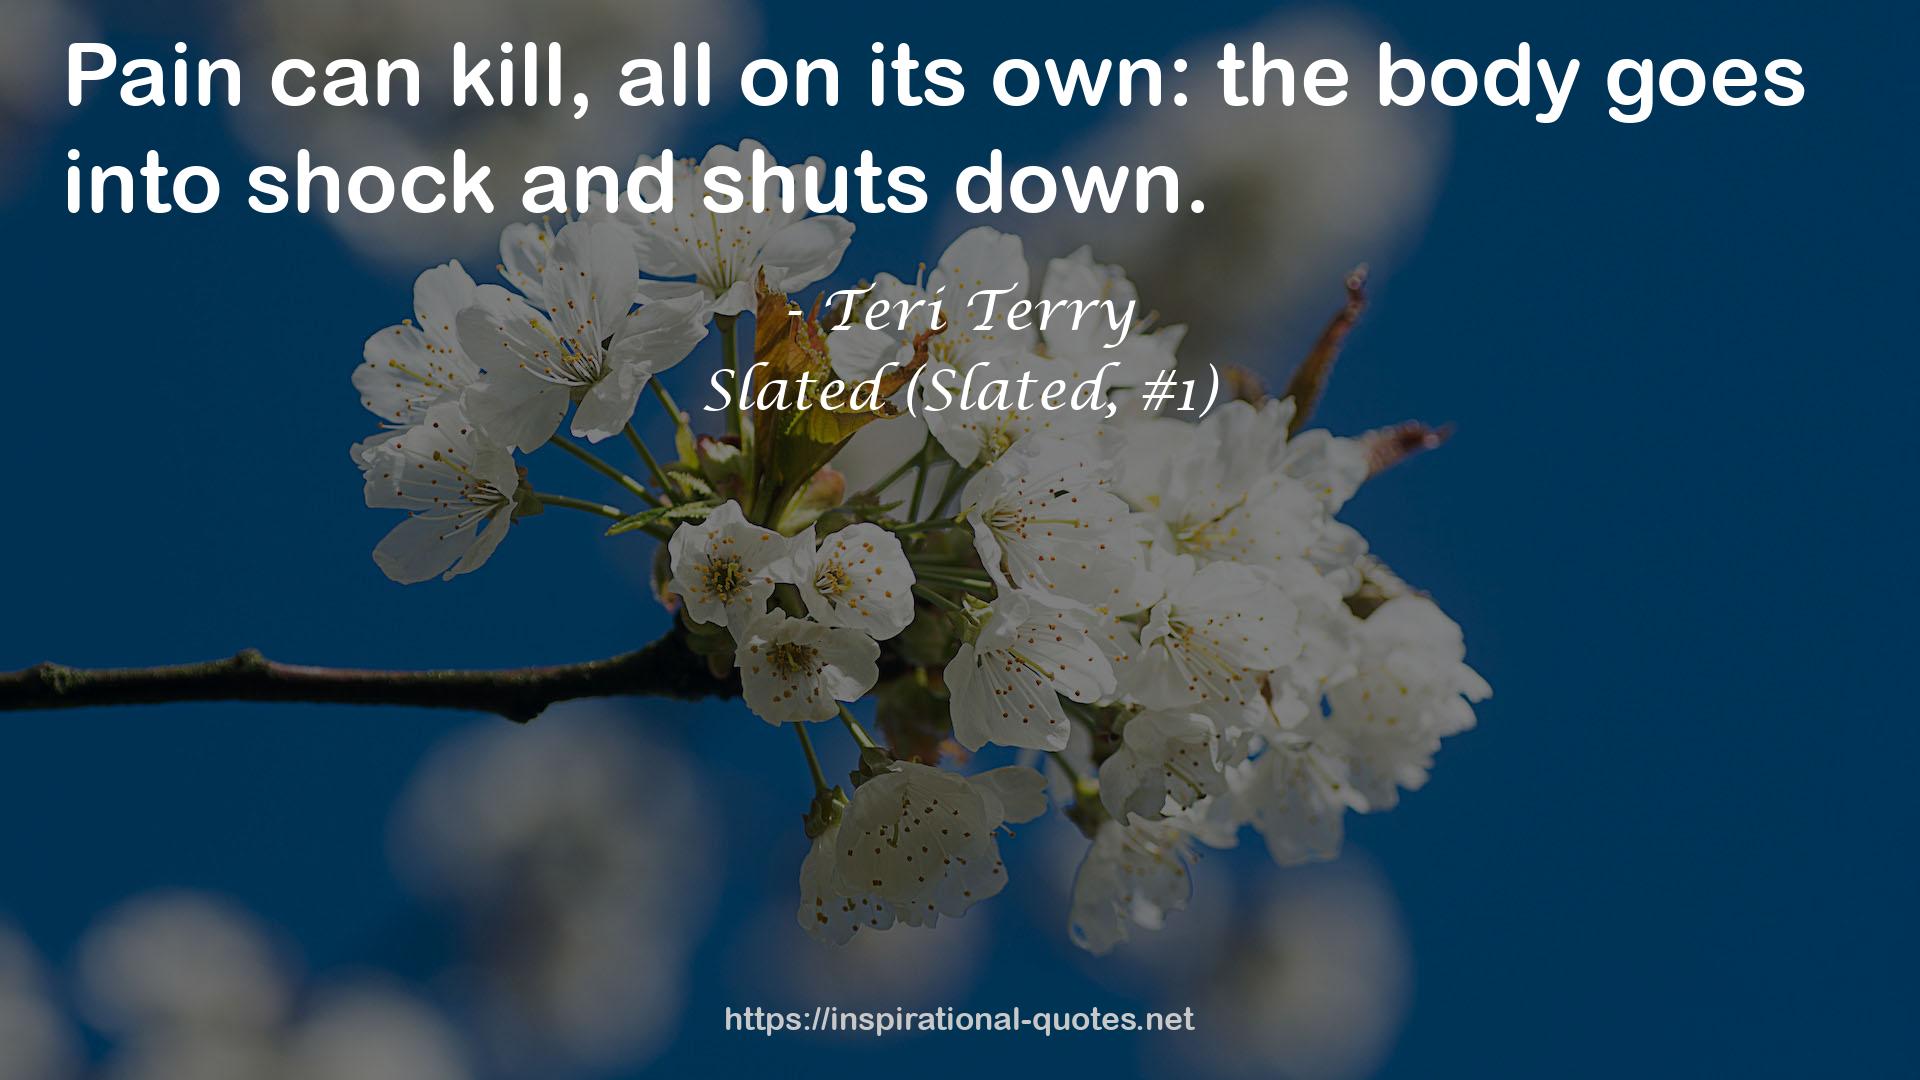 Slated (Slated, #1) QUOTES